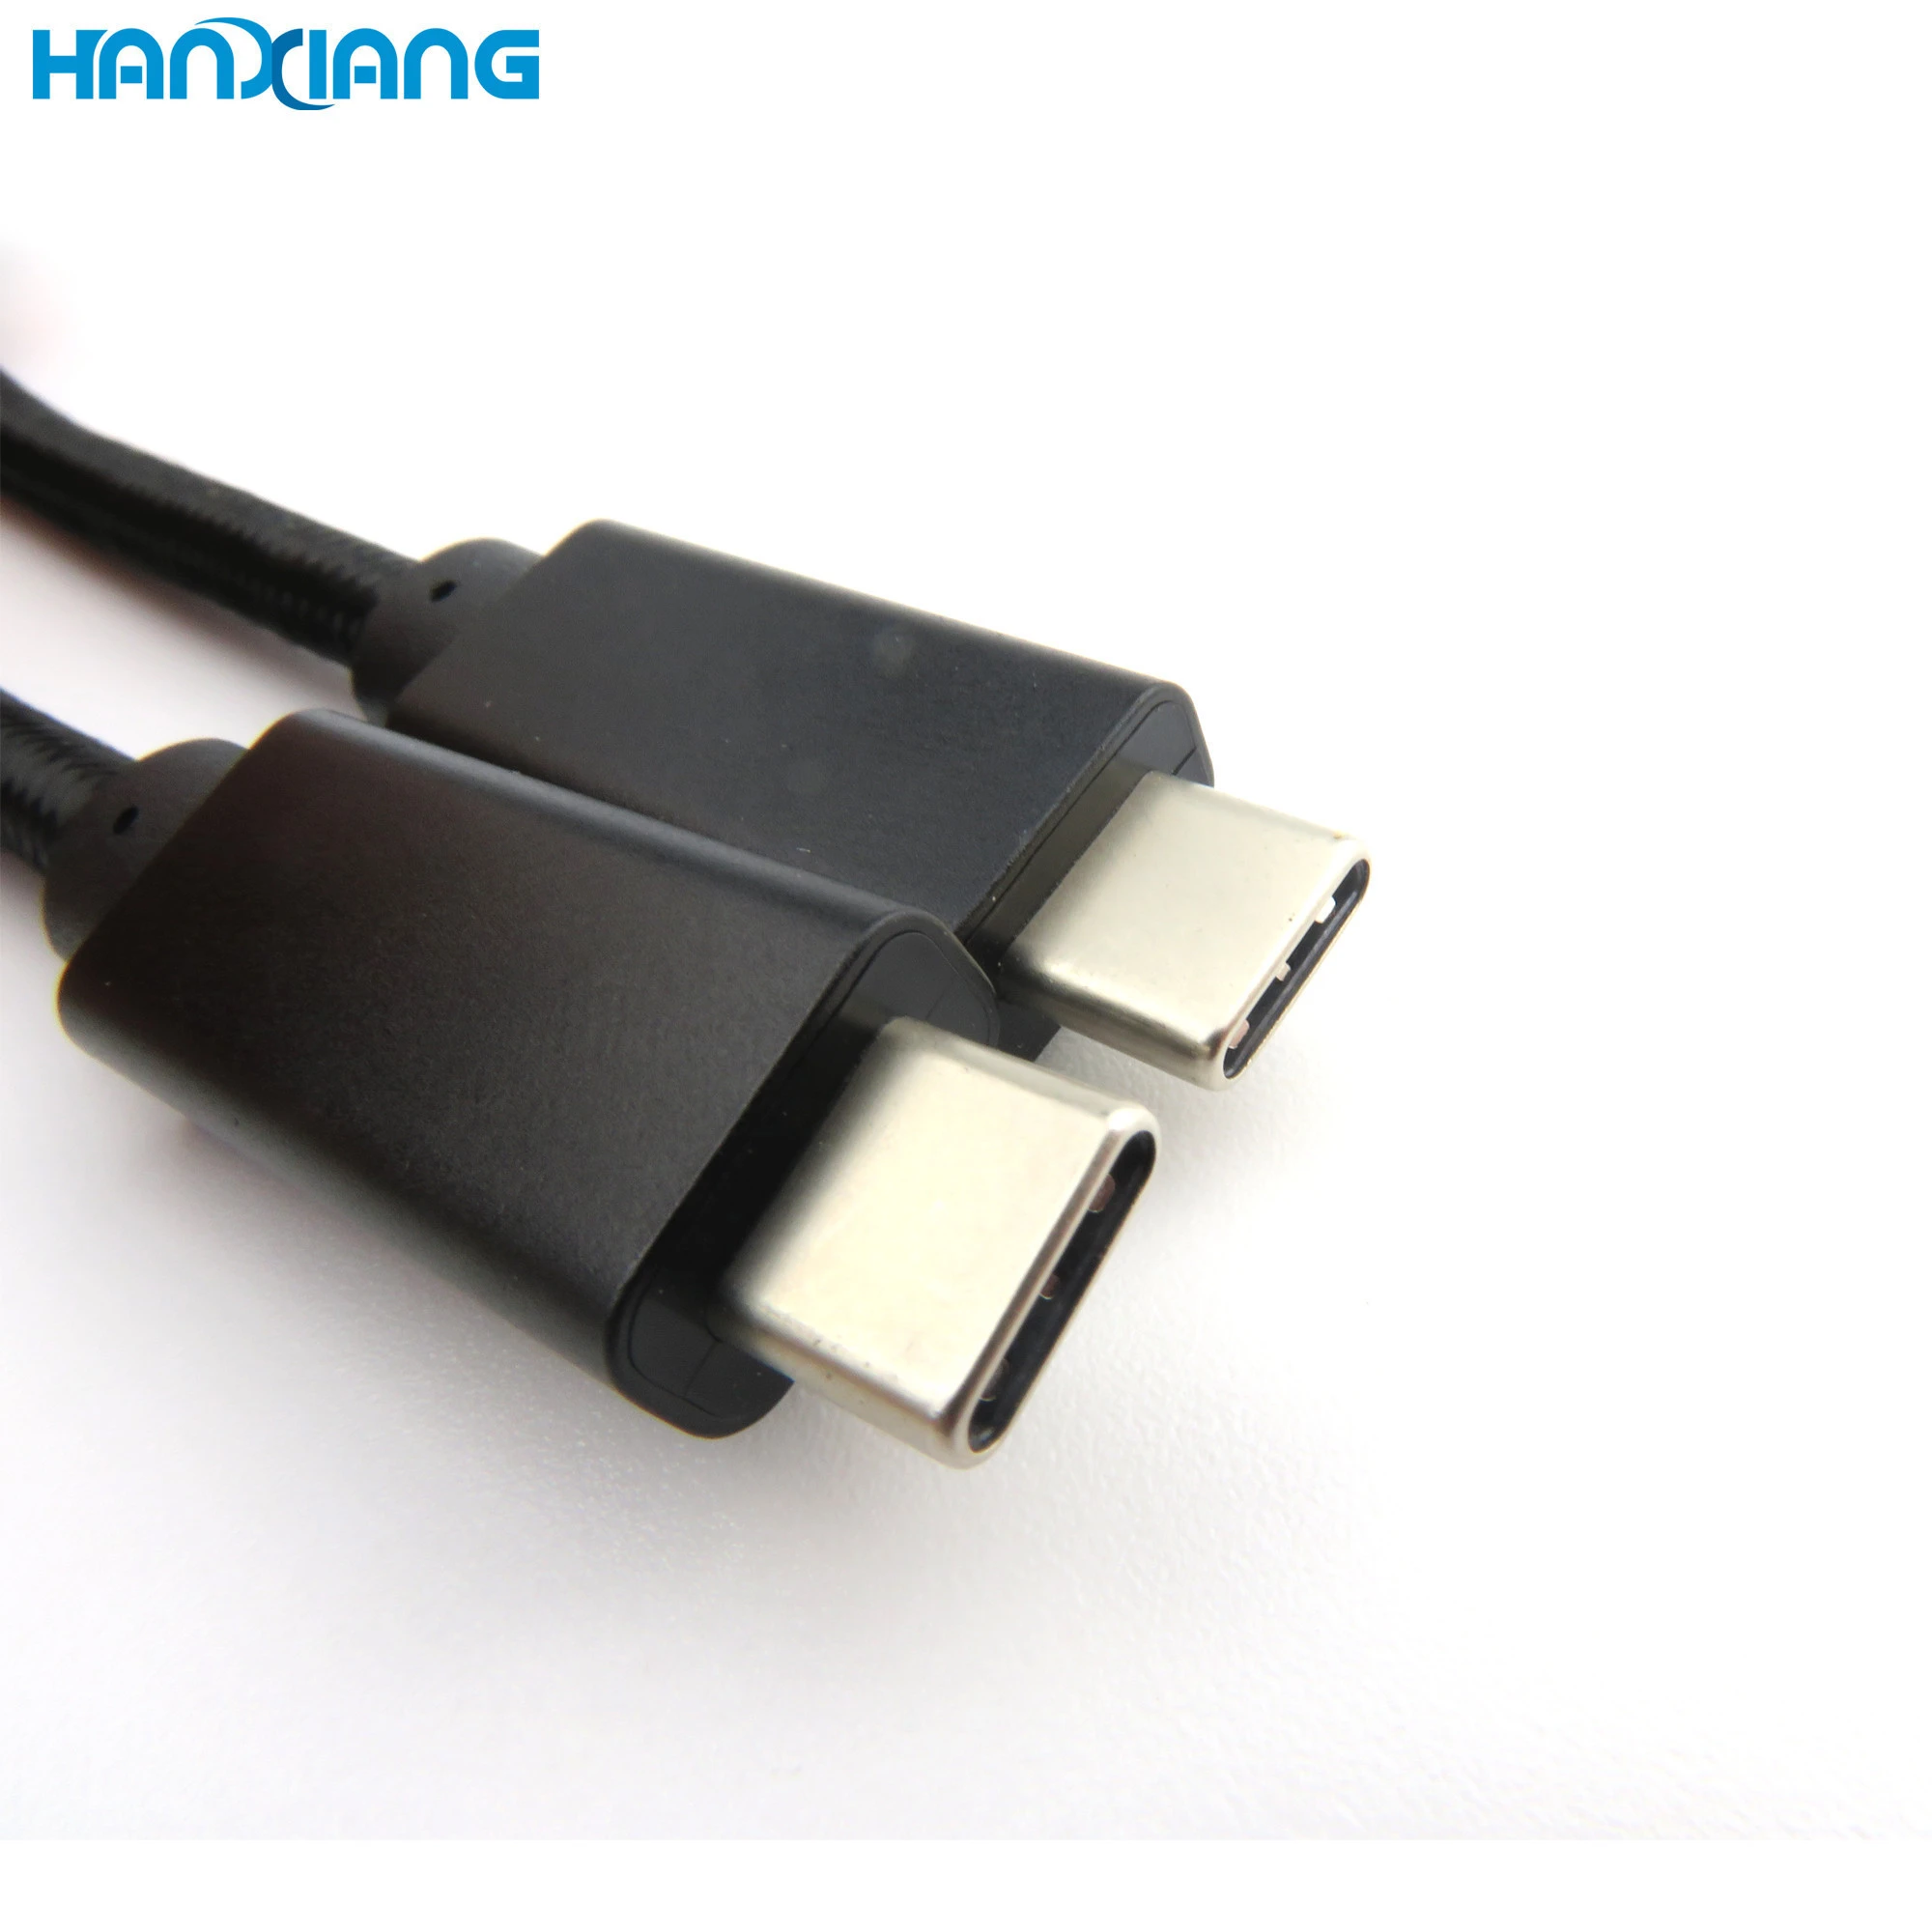 Universal TPE E-MARK Chip Nylon Braided Material OEM Type C 5A 100W PD Funtion USB Cable For Smartphone/Computer Accessories